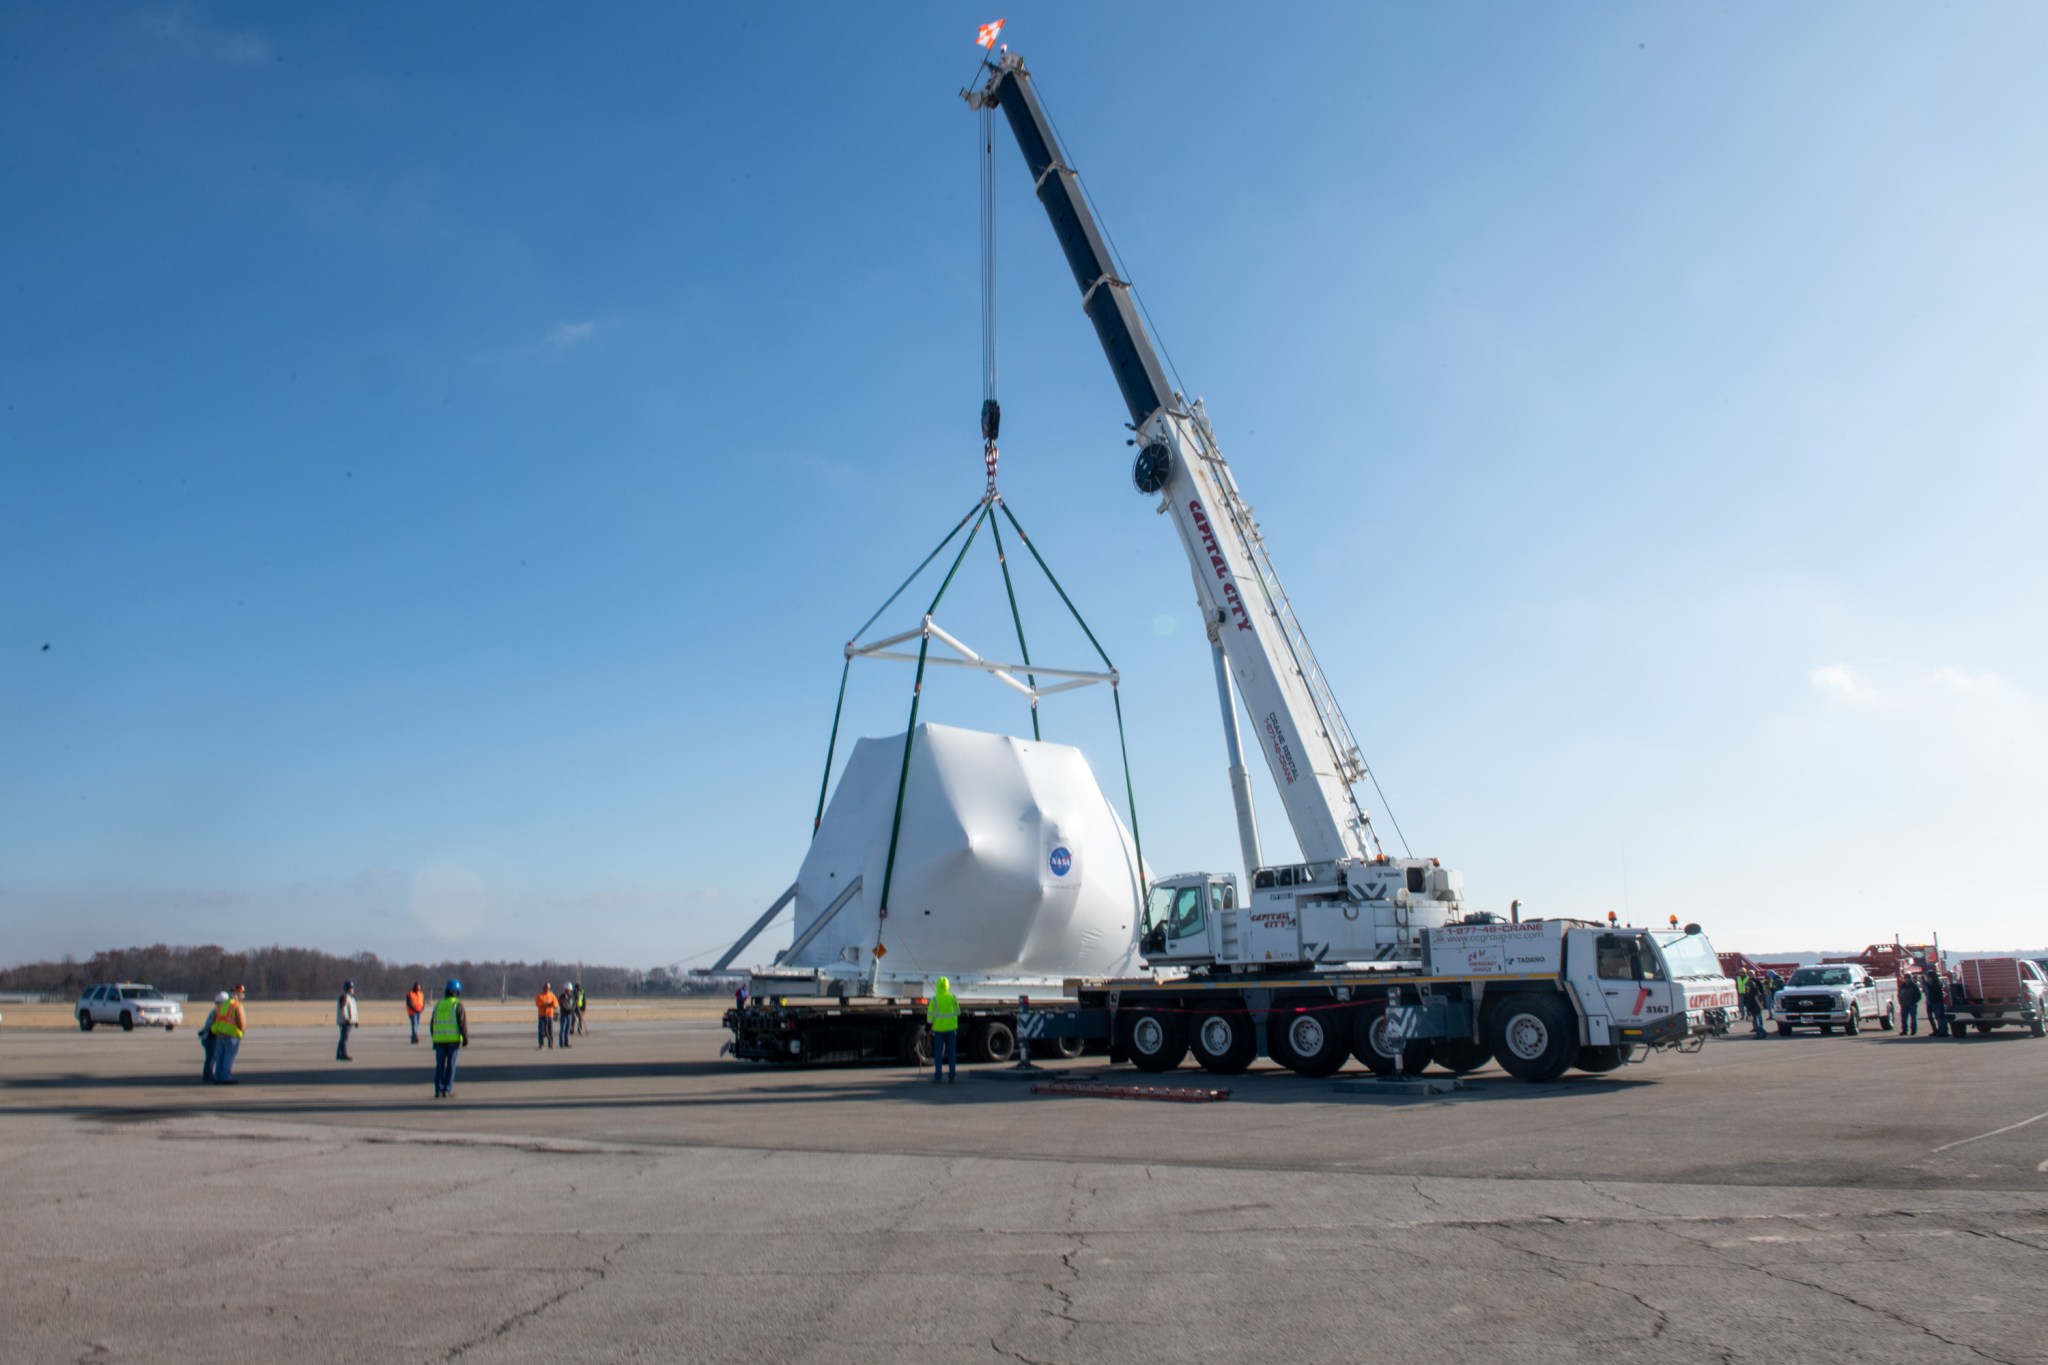 The Orion Spacecraft being lifted onto the truck for transport.